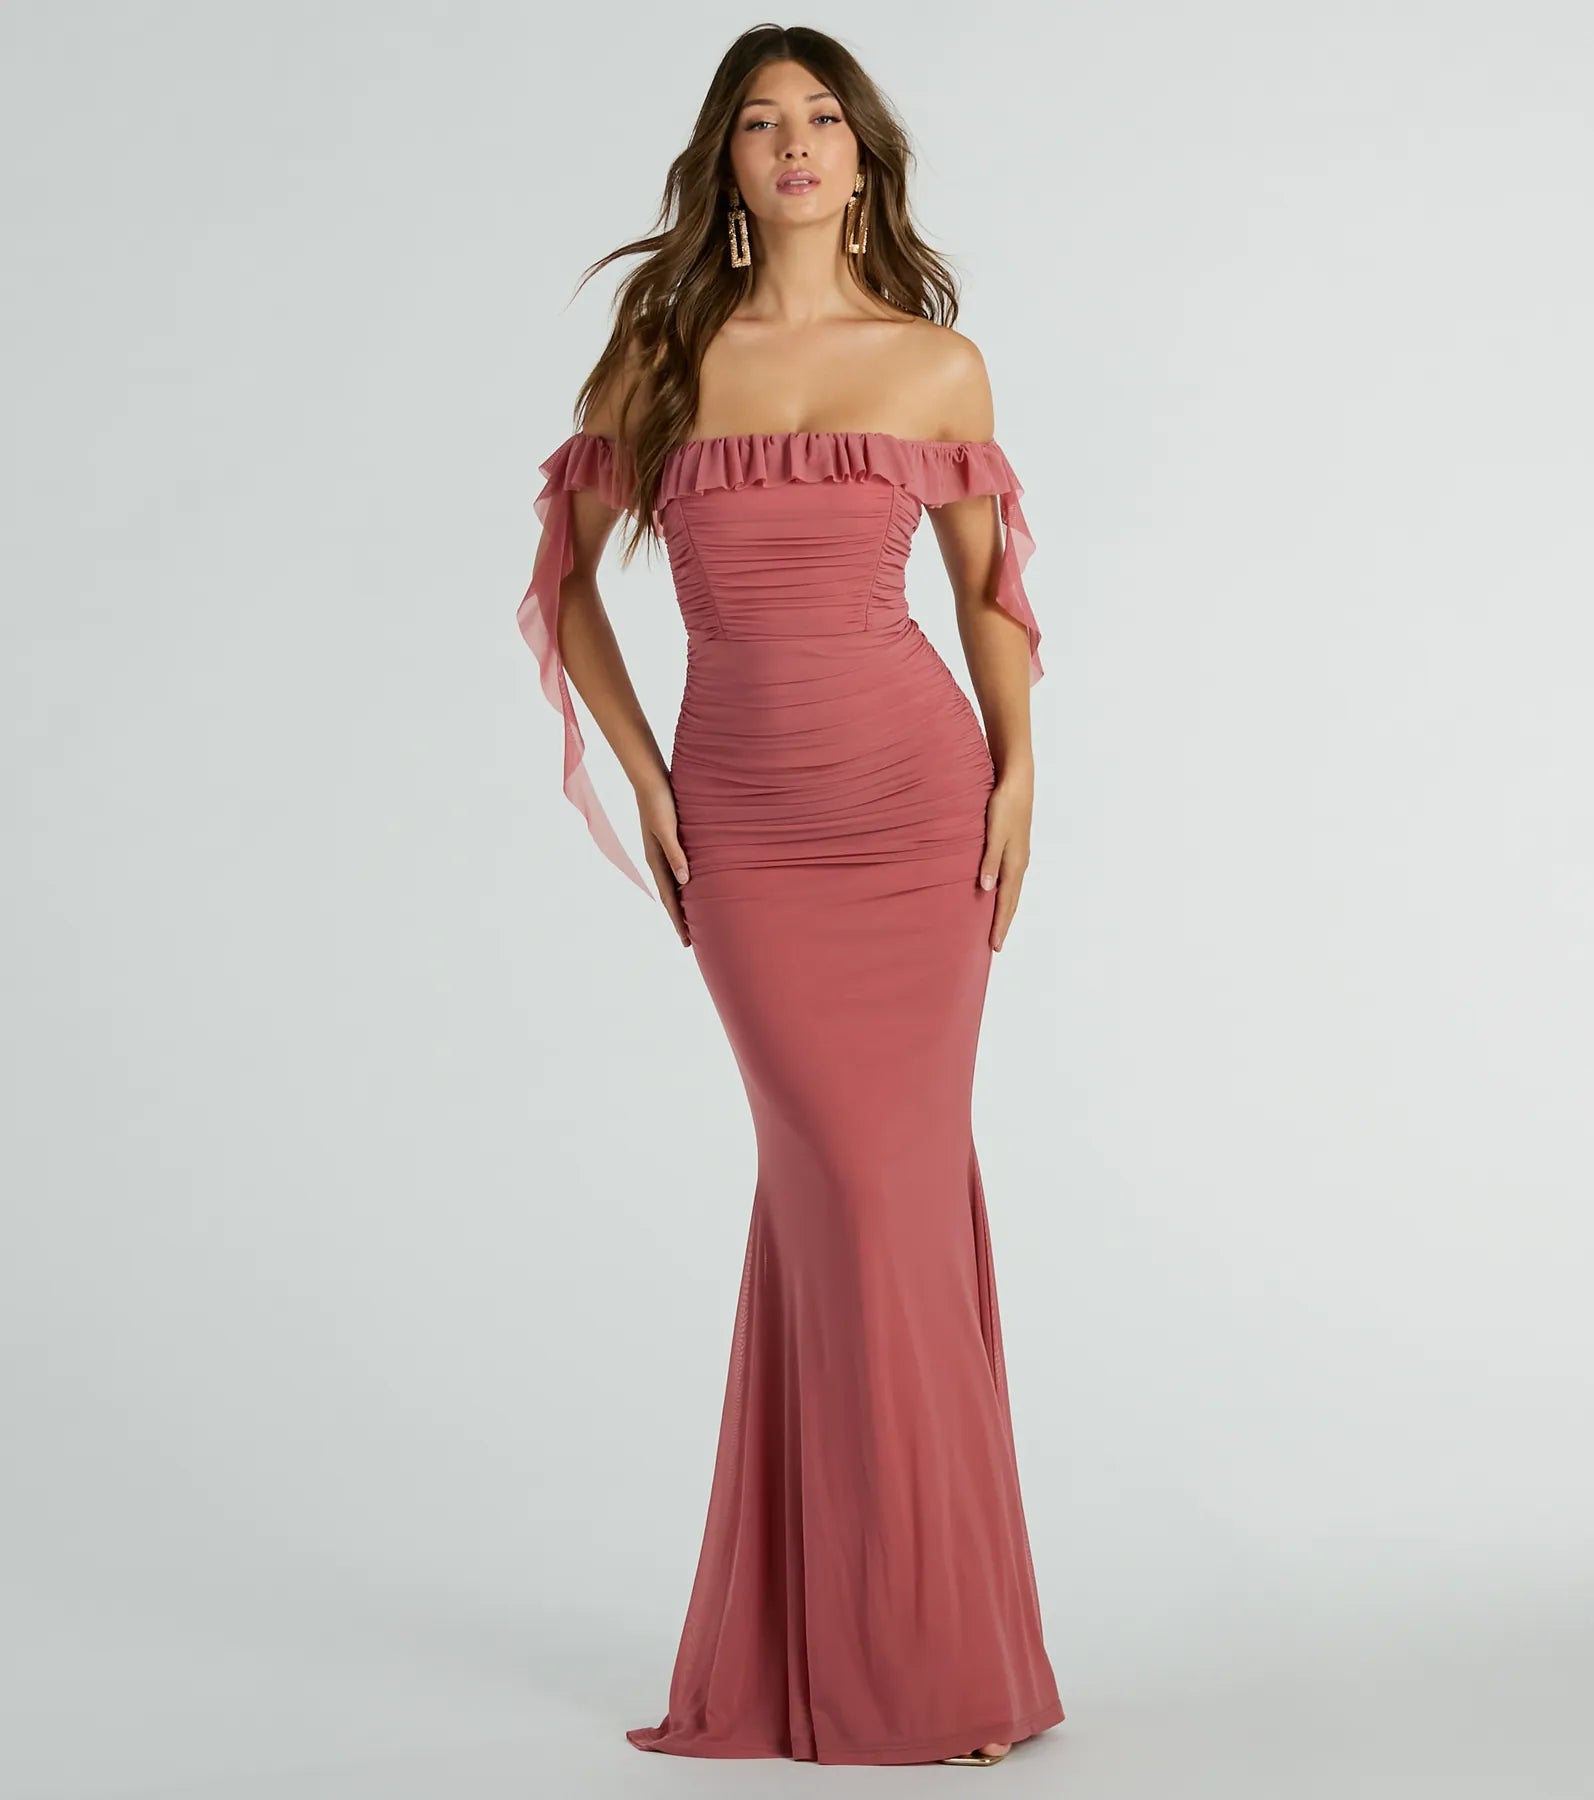 Sexy Sophisticated Off the Shoulder Mermaid Knit Stretchy Ruched Mesh Maxi Dress With Ruffles